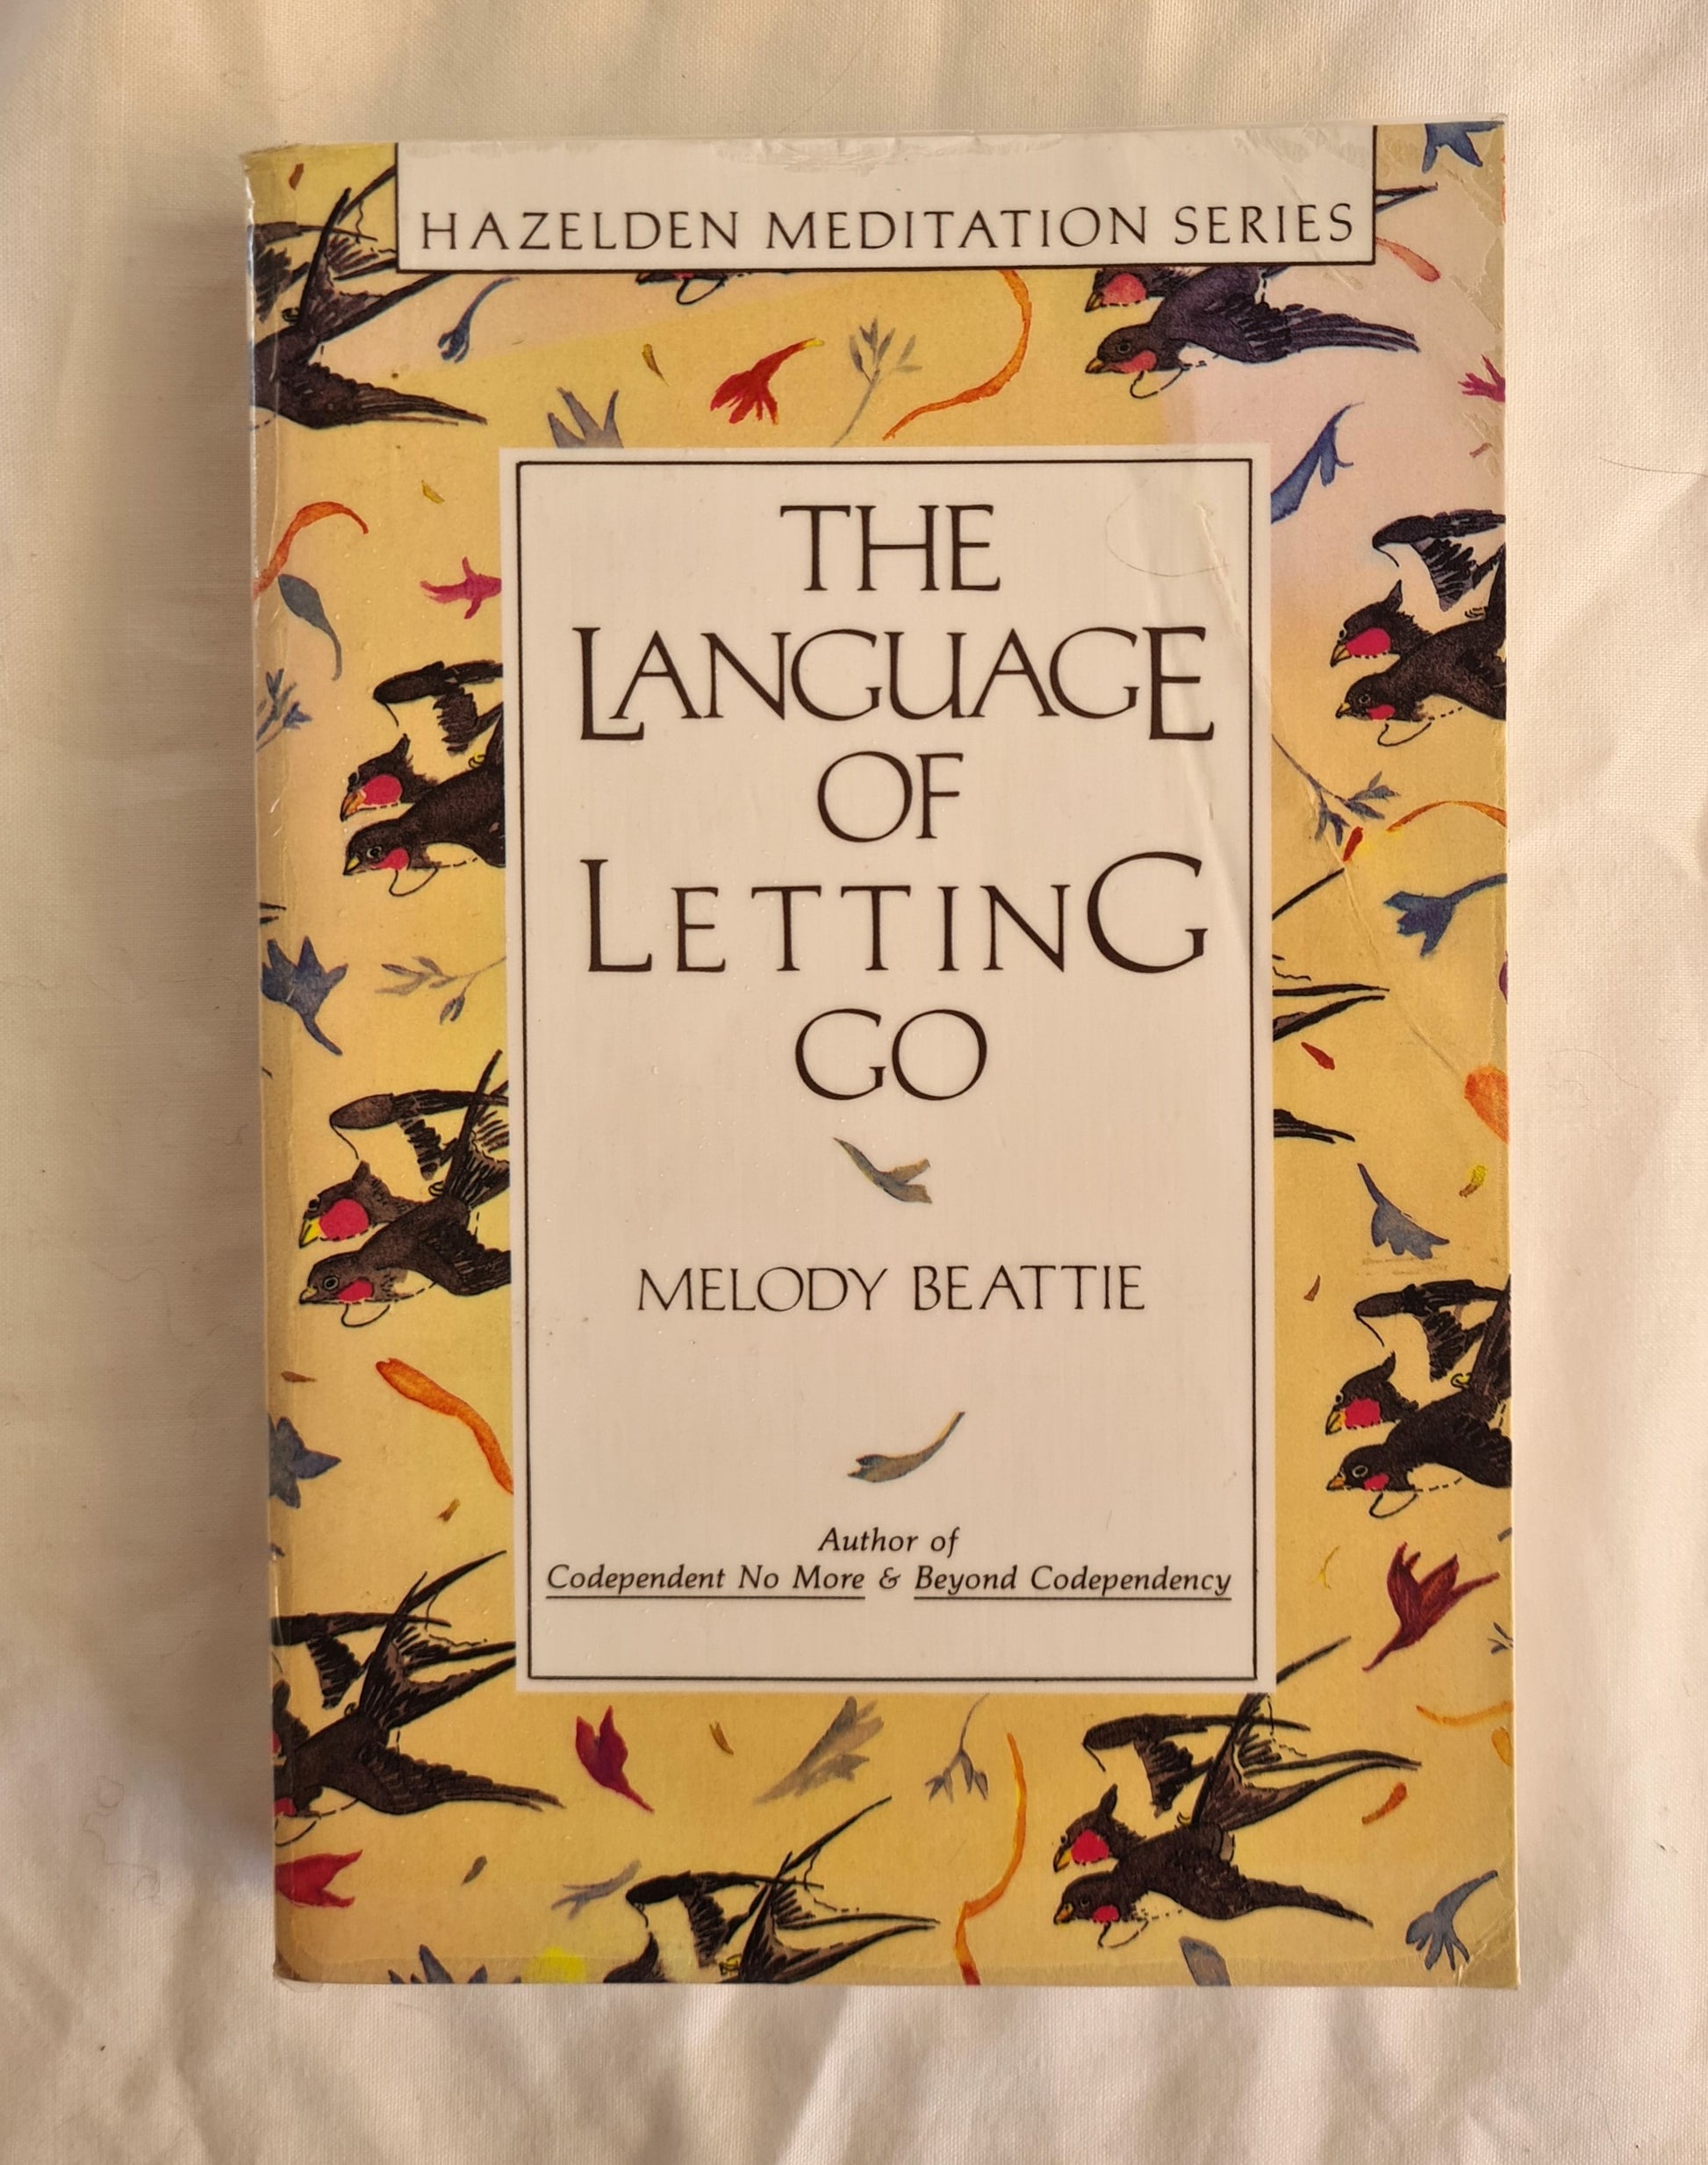 The Language of Letting Go  by Melody Beattie